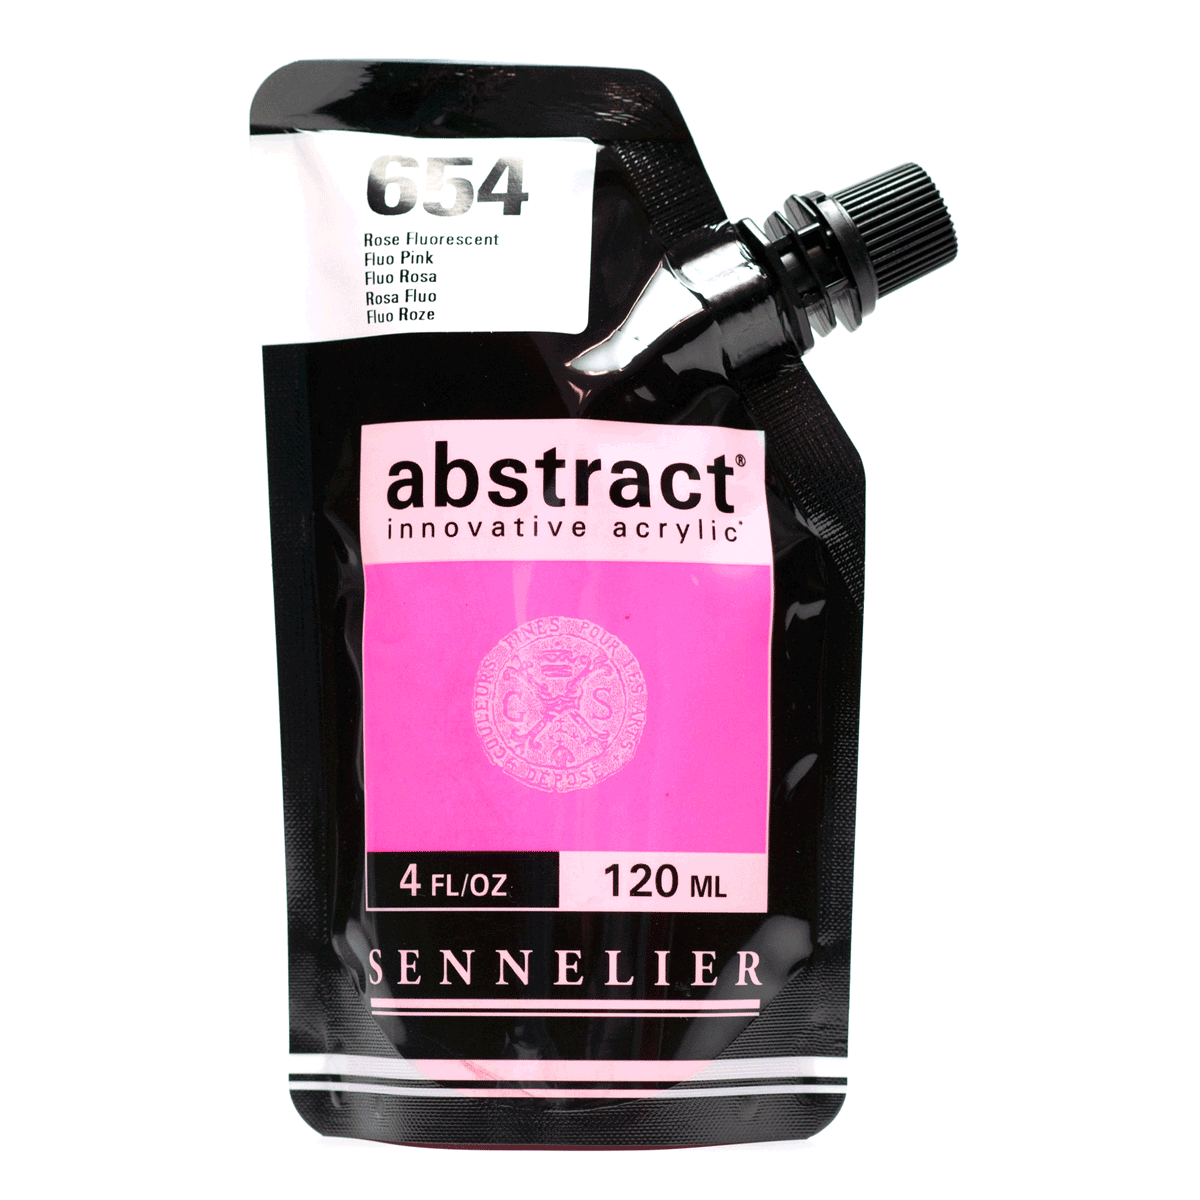 Abstract Acrylic Pouch - 654 Fluorescent Pink 120ml